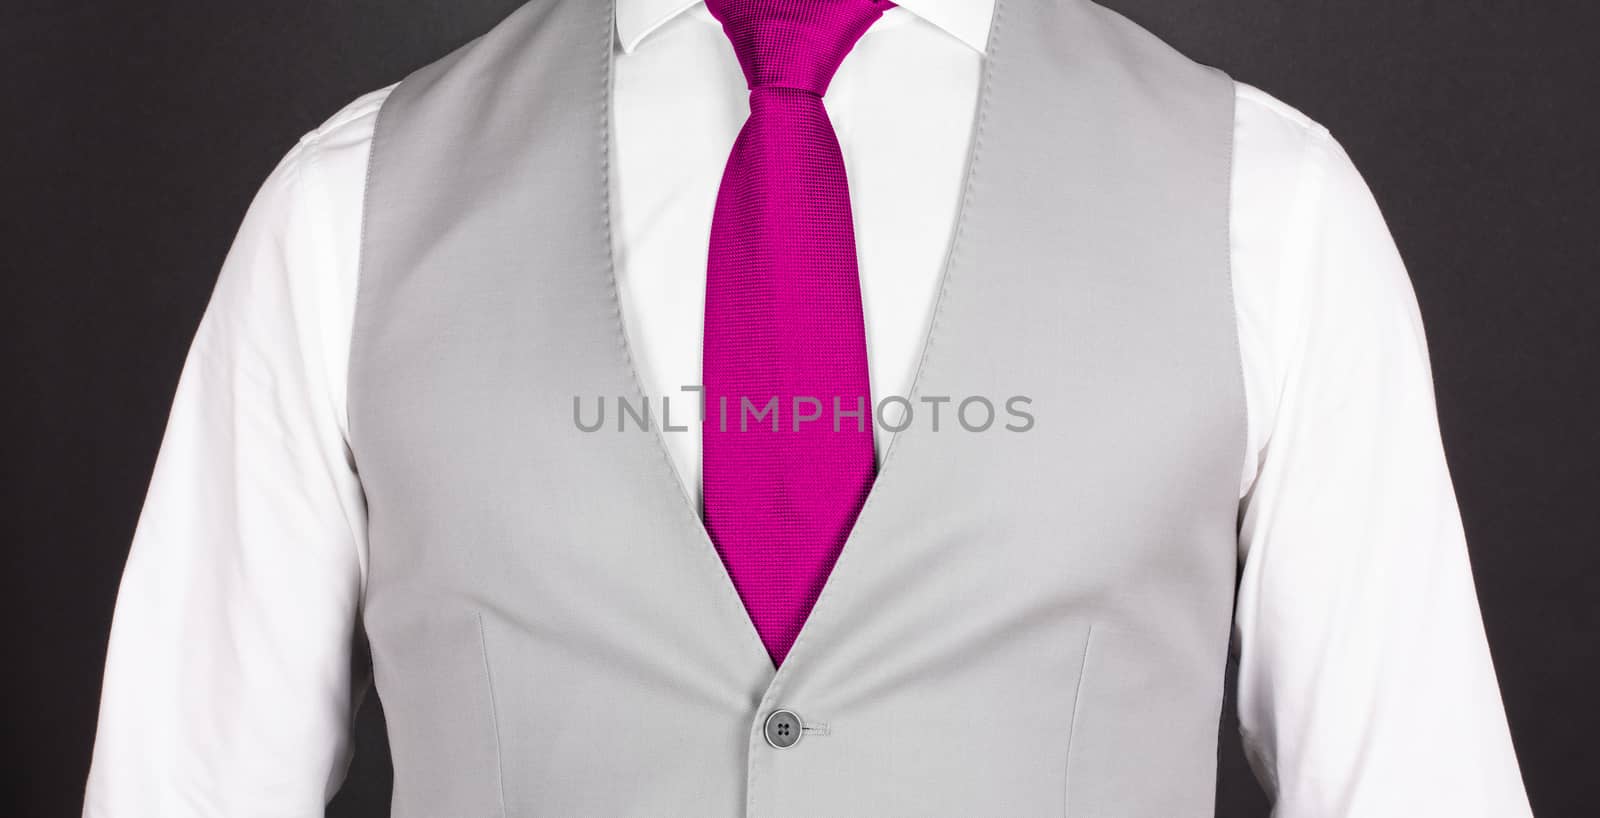 Man in a grey suit with pink tie, close-up